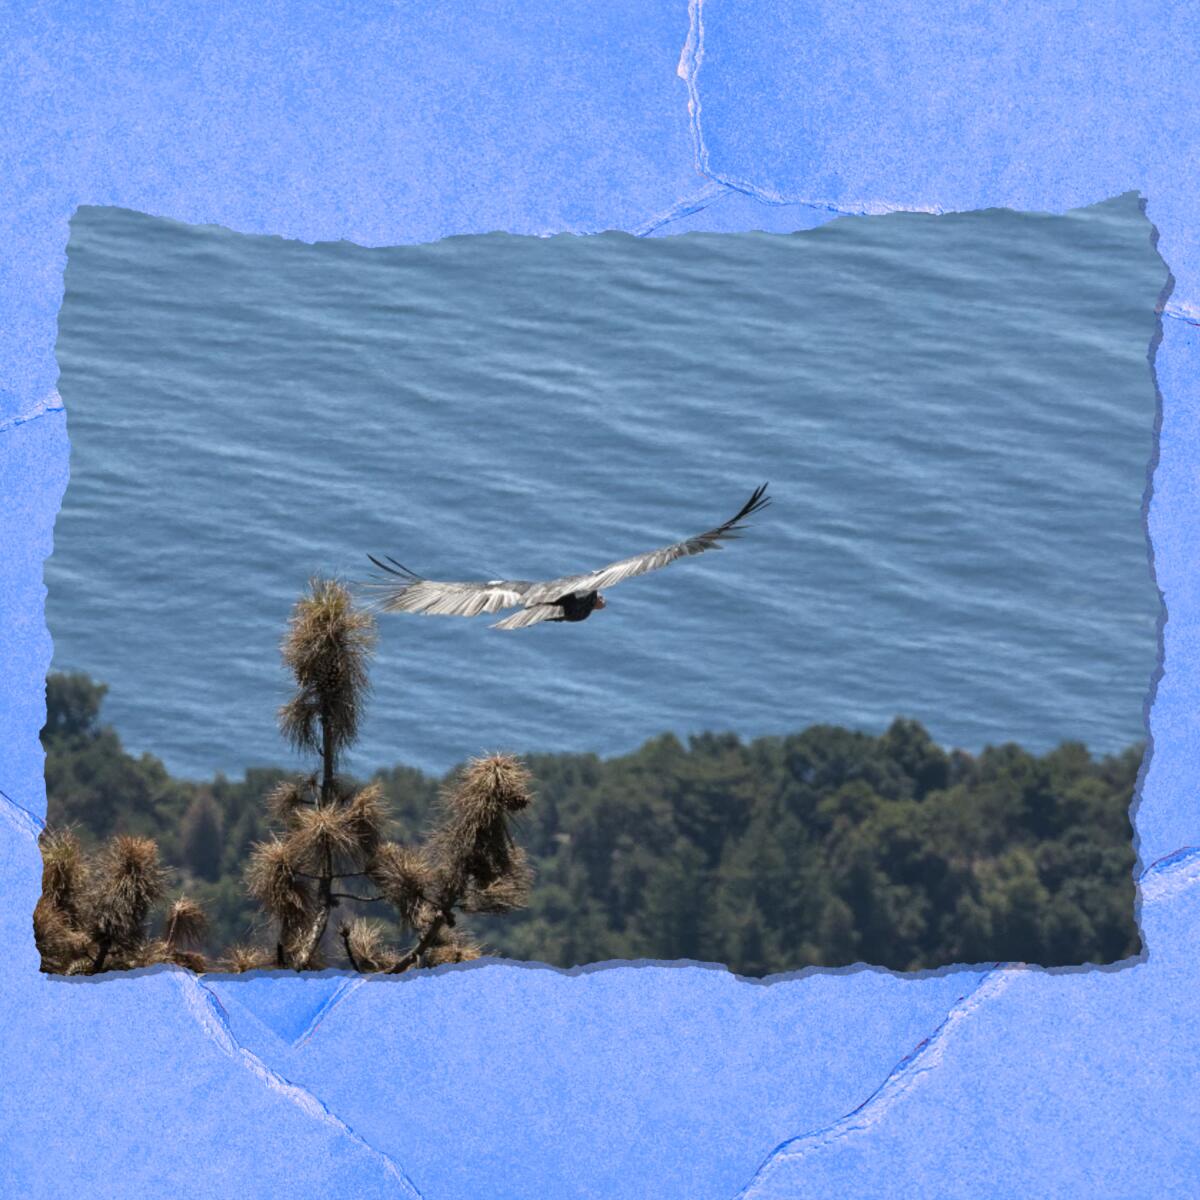 A large bird soars over trees. In the background is the ocean.